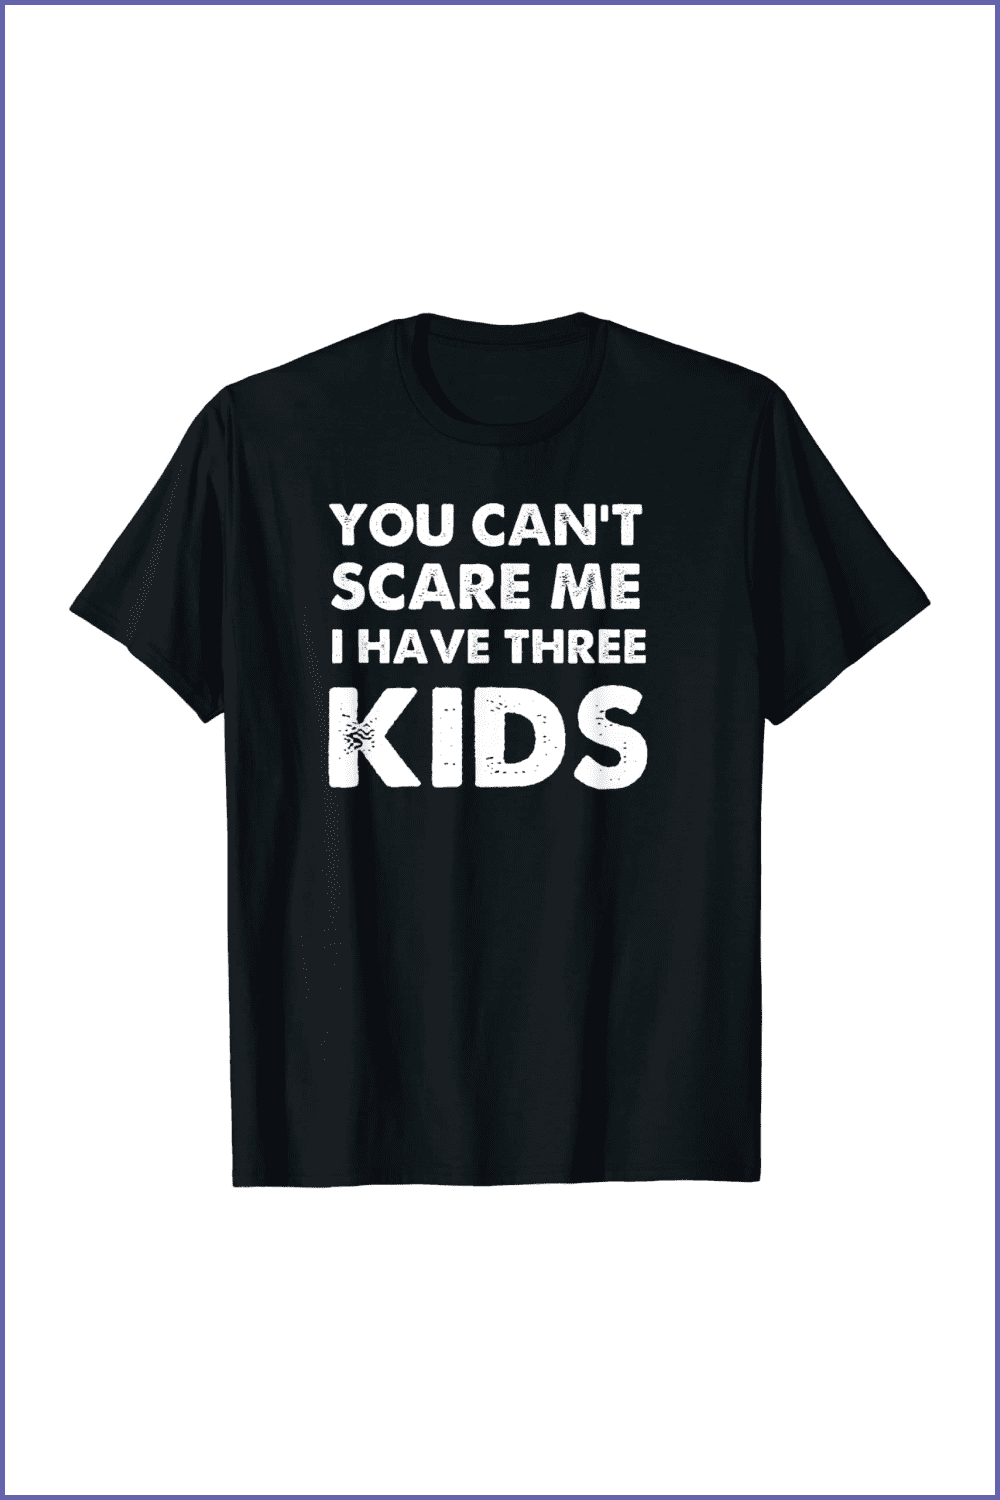 You Can't Scare Me I Have Three Kids - Black Shirt For Moms and Dads.